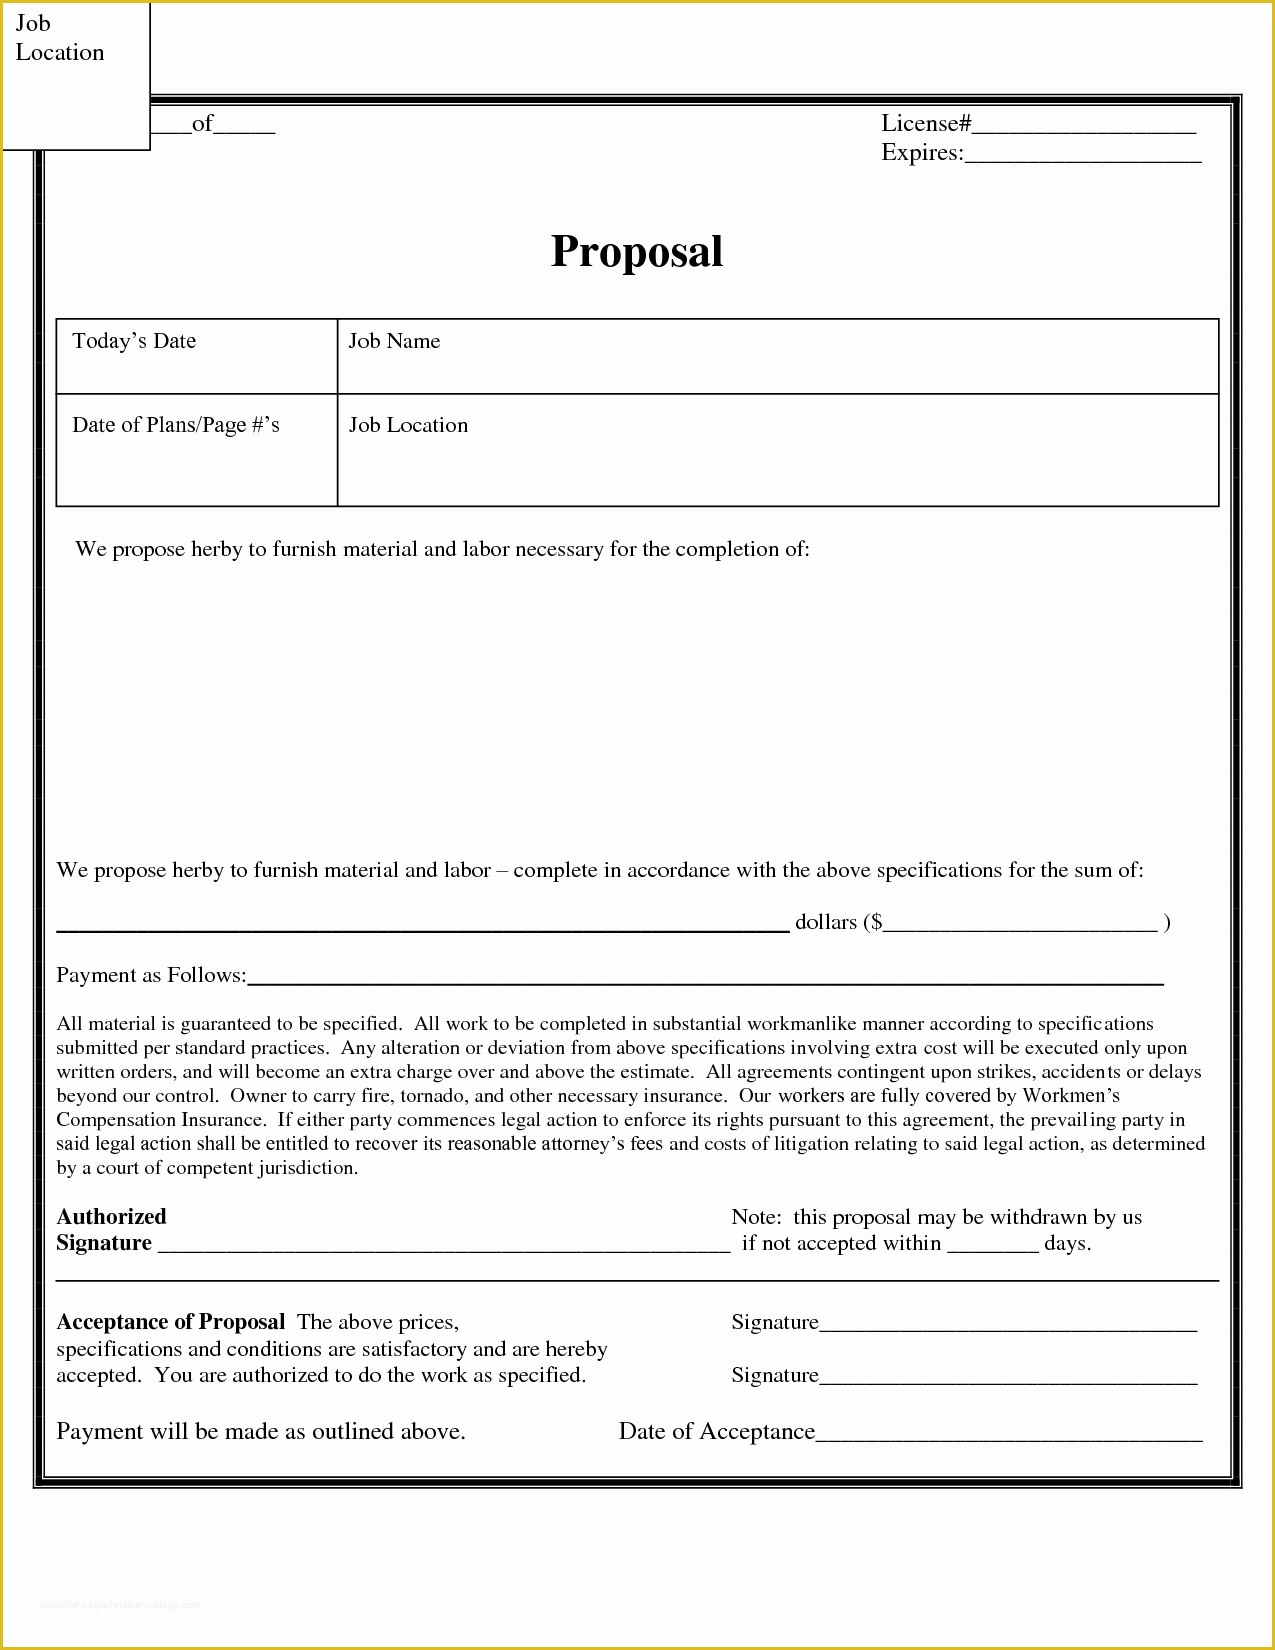 Free Job Proposal Templates Of 9 Best Of totally Free Proposal Templates